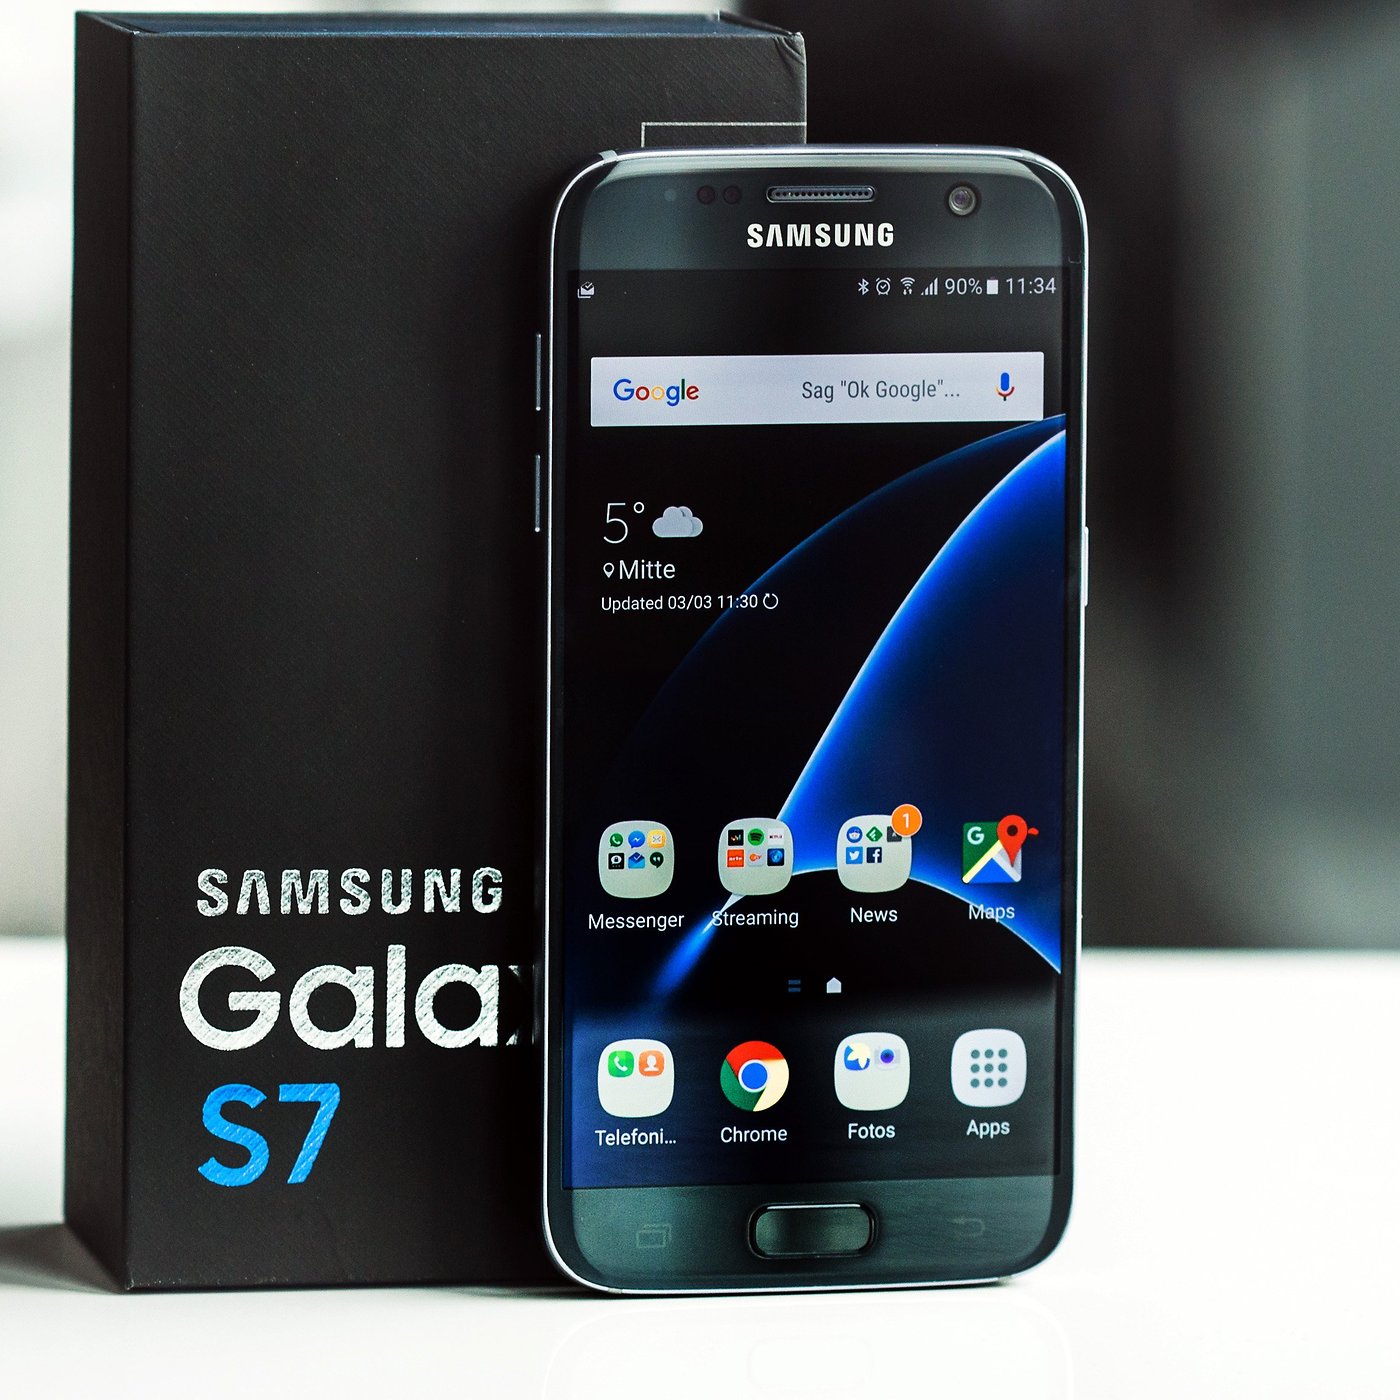 Samsung Galaxy Z Flip 5 Hands-On: Bigger Display, More Personal  Customizations - CNET